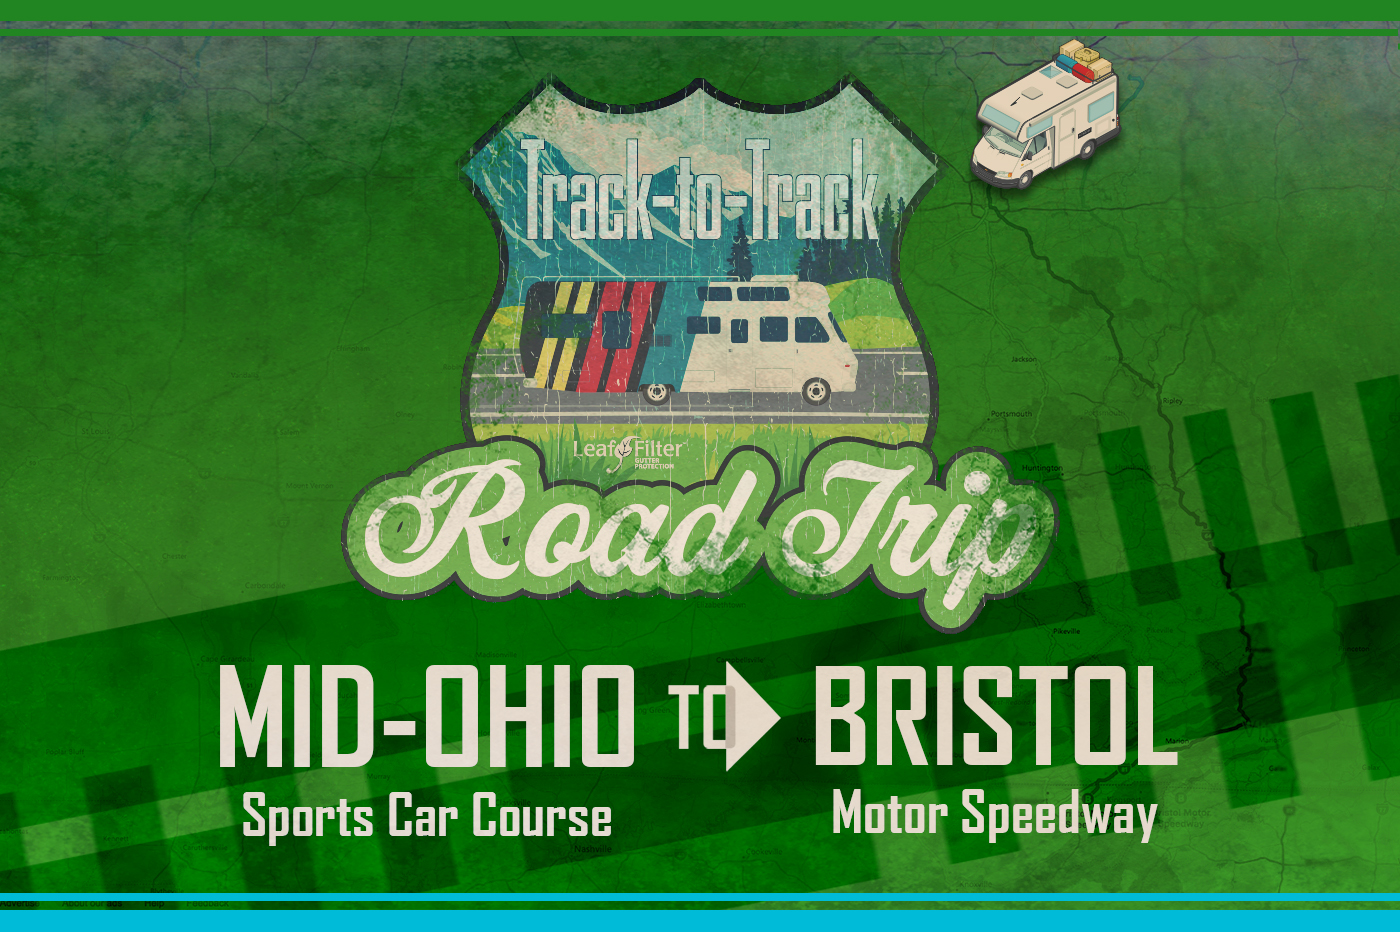 Track-to-track road trip Mid-Ohio to Bristol Motor Speedway